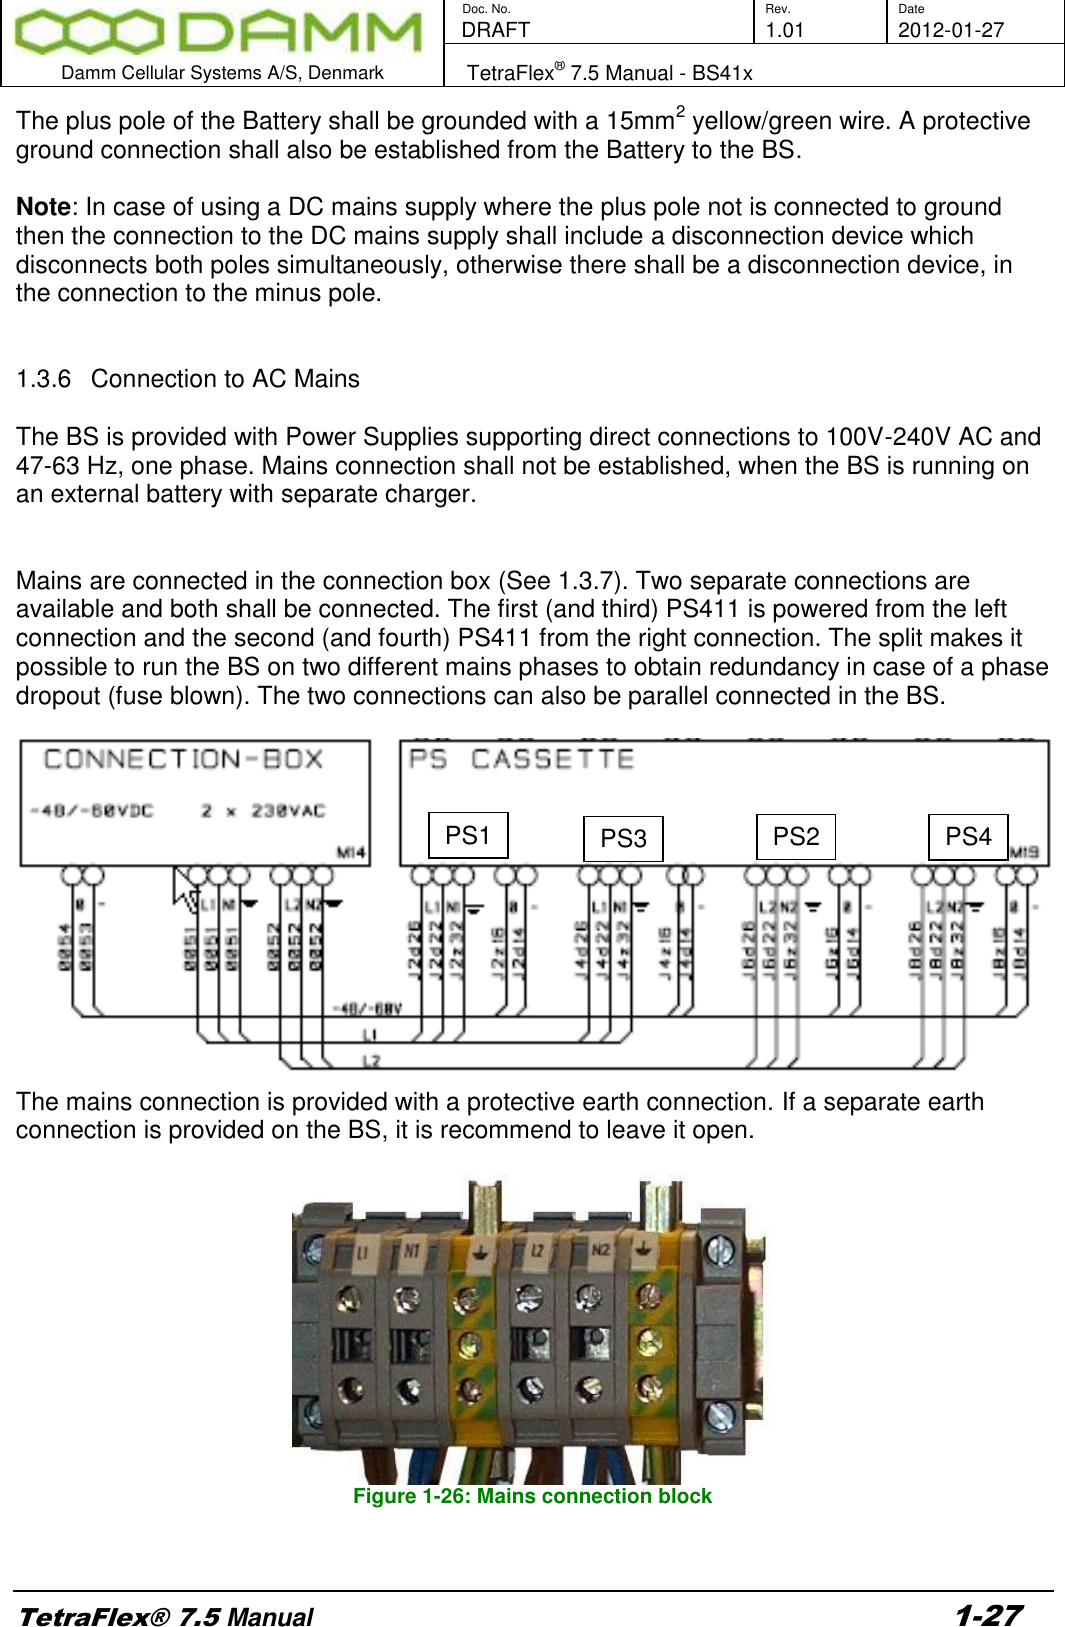        Doc. No. Rev. Date    DRAFT  1.01 2012-01-27  Damm Cellular Systems A/S, Denmark   TetraFlex® 7.5 Manual - BS41x  TetraFlex® 7.5 Manual 1-27 The plus pole of the Battery shall be grounded with a 15mm2 yellow/green wire. A protective ground connection shall also be established from the Battery to the BS.  Note: In case of using a DC mains supply where the plus pole not is connected to ground then the connection to the DC mains supply shall include a disconnection device which disconnects both poles simultaneously, otherwise there shall be a disconnection device, in the connection to the minus pole.   1.3.6  Connection to AC Mains  The BS is provided with Power Supplies supporting direct connections to 100V-240V AC and 47-63 Hz, one phase. Mains connection shall not be established, when the BS is running on an external battery with separate charger.   Mains are connected in the connection box (See 1.3.7). Two separate connections are available and both shall be connected. The first (and third) PS411 is powered from the left connection and the second (and fourth) PS411 from the right connection. The split makes it possible to run the BS on two different mains phases to obtain redundancy in case of a phase dropout (fuse blown). The two connections can also be parallel connected in the BS.    The mains connection is provided with a protective earth connection. If a separate earth connection is provided on the BS, it is recommend to leave it open.    Figure 1-26: Mains connection block  PS1 PS3 PS2 PS4 